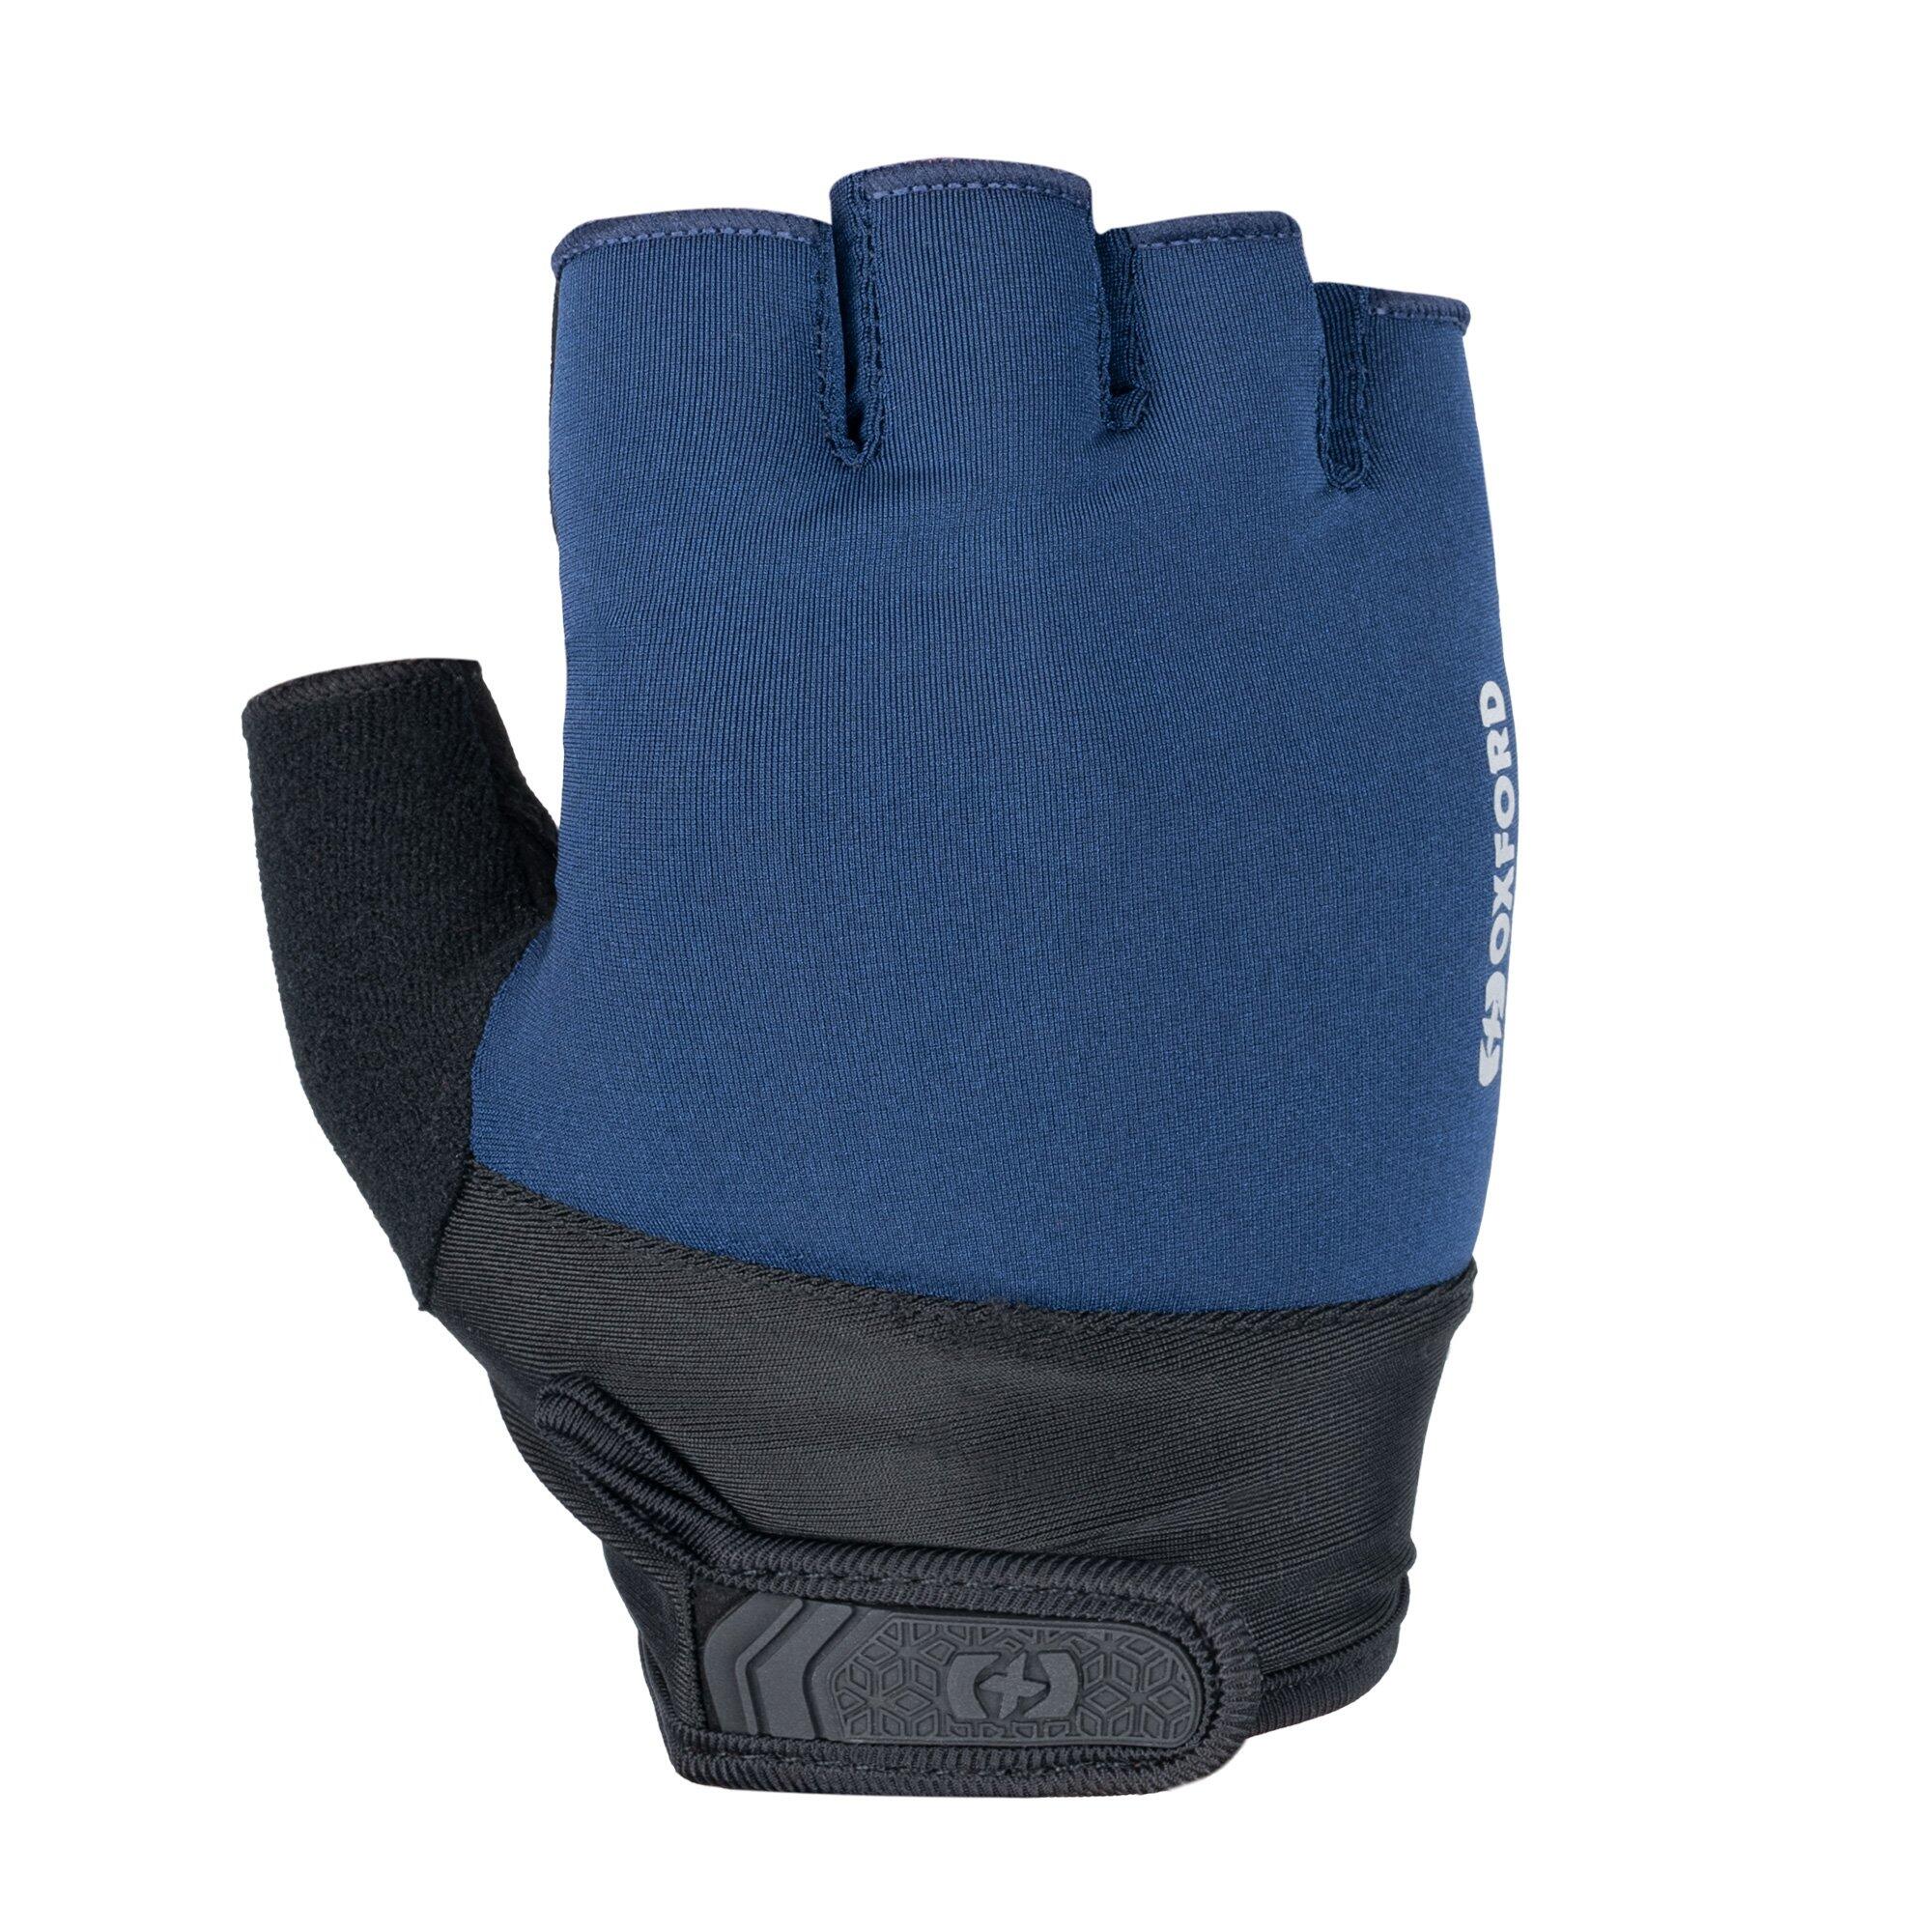 Oxford Cadence 2.0 Mitts Blue XS 1/3